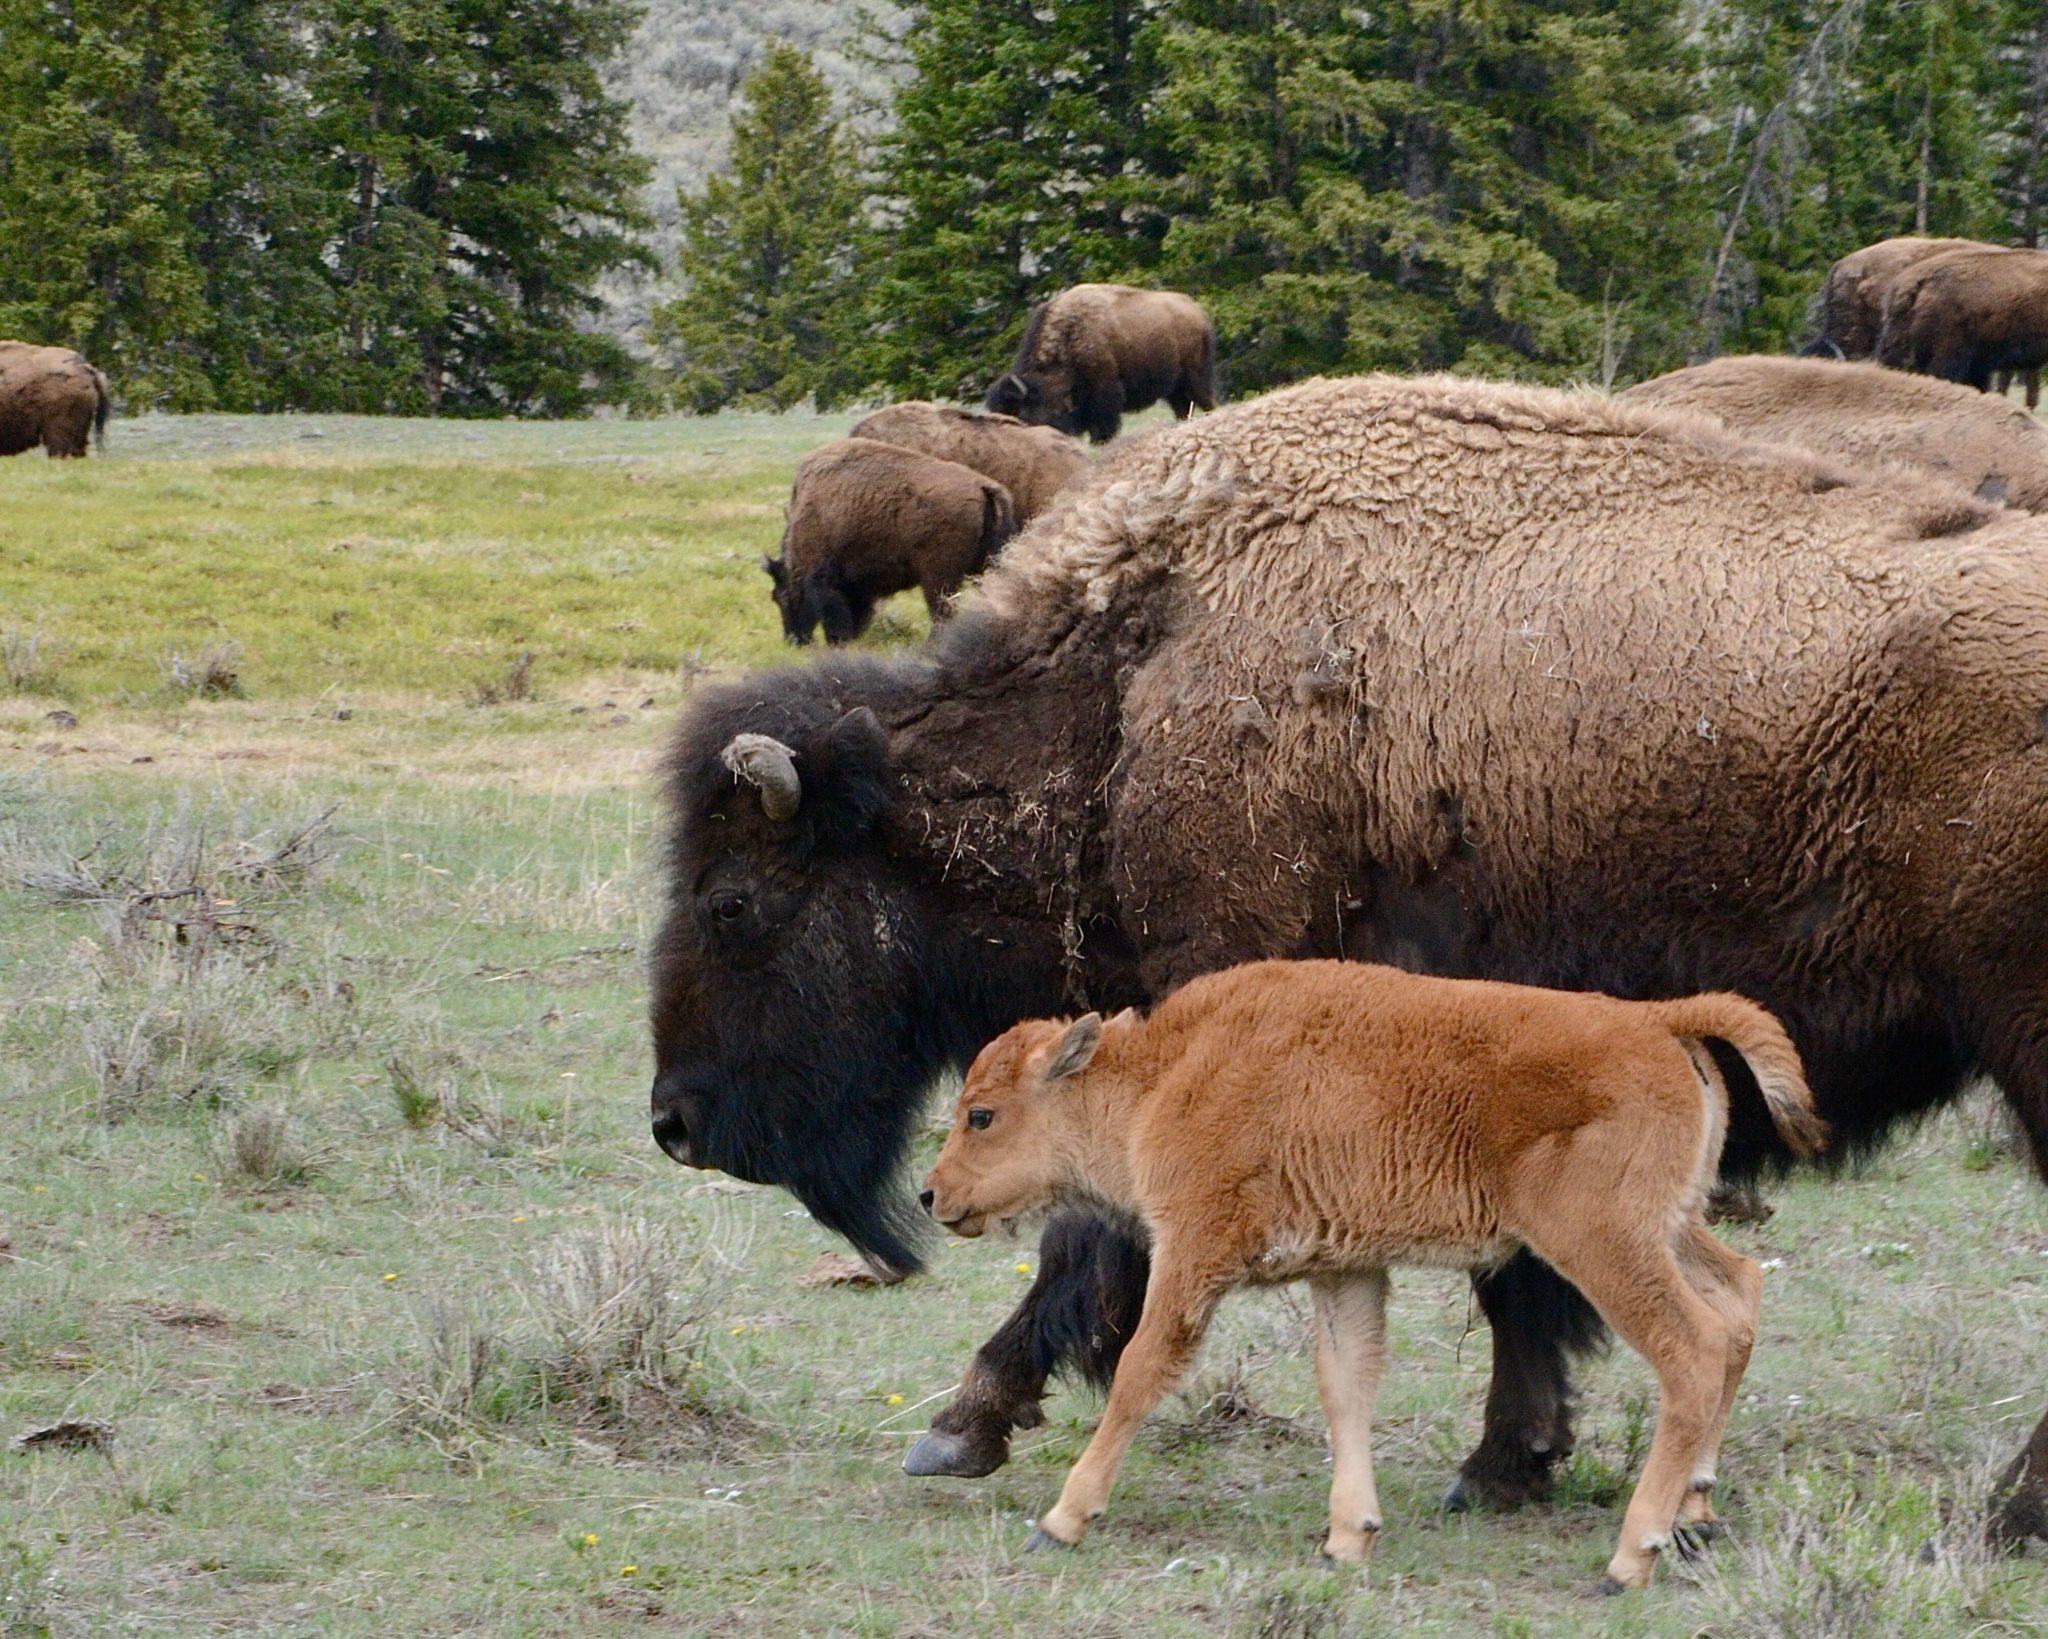 Herd of bison, featured on a newborn spring baby and its mother, capture in Jackson Hole by wildlife seeker and local photographer Stephanie Pidcock.